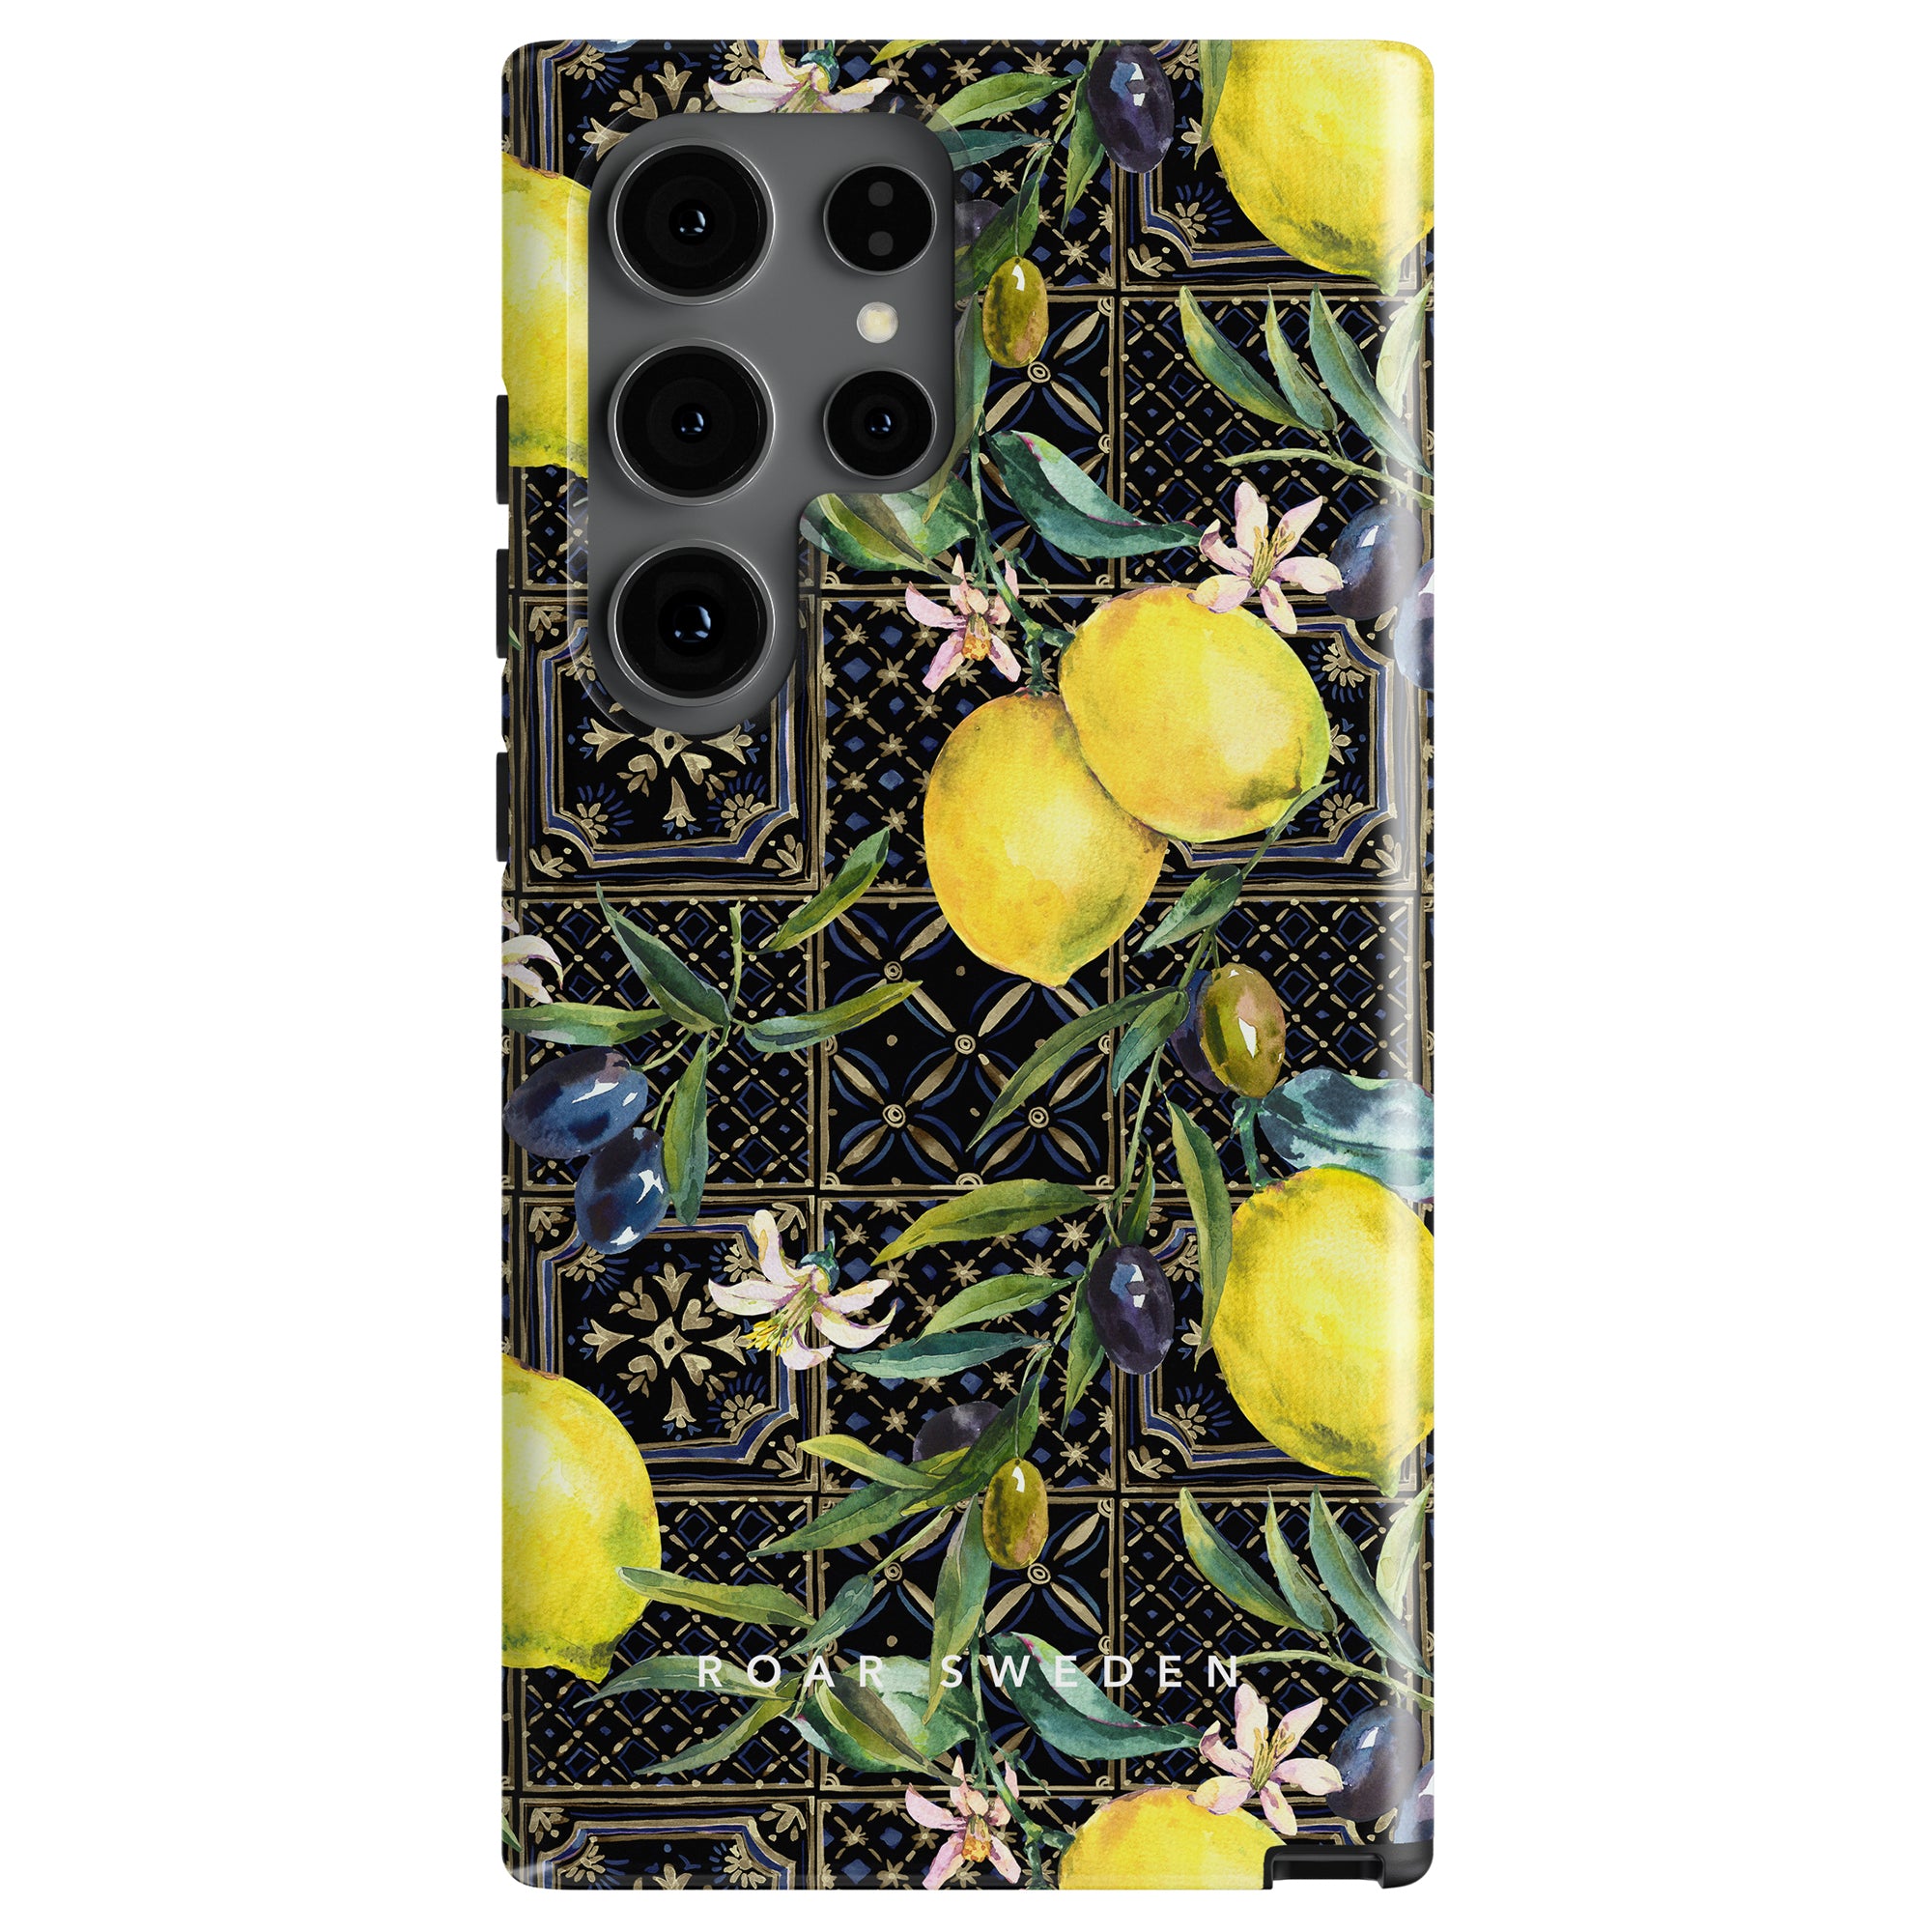 A smartphone case with a pattern of lemons and olive branches on a geometric, black and gold background, labeled "Sorrento - Tough Case".